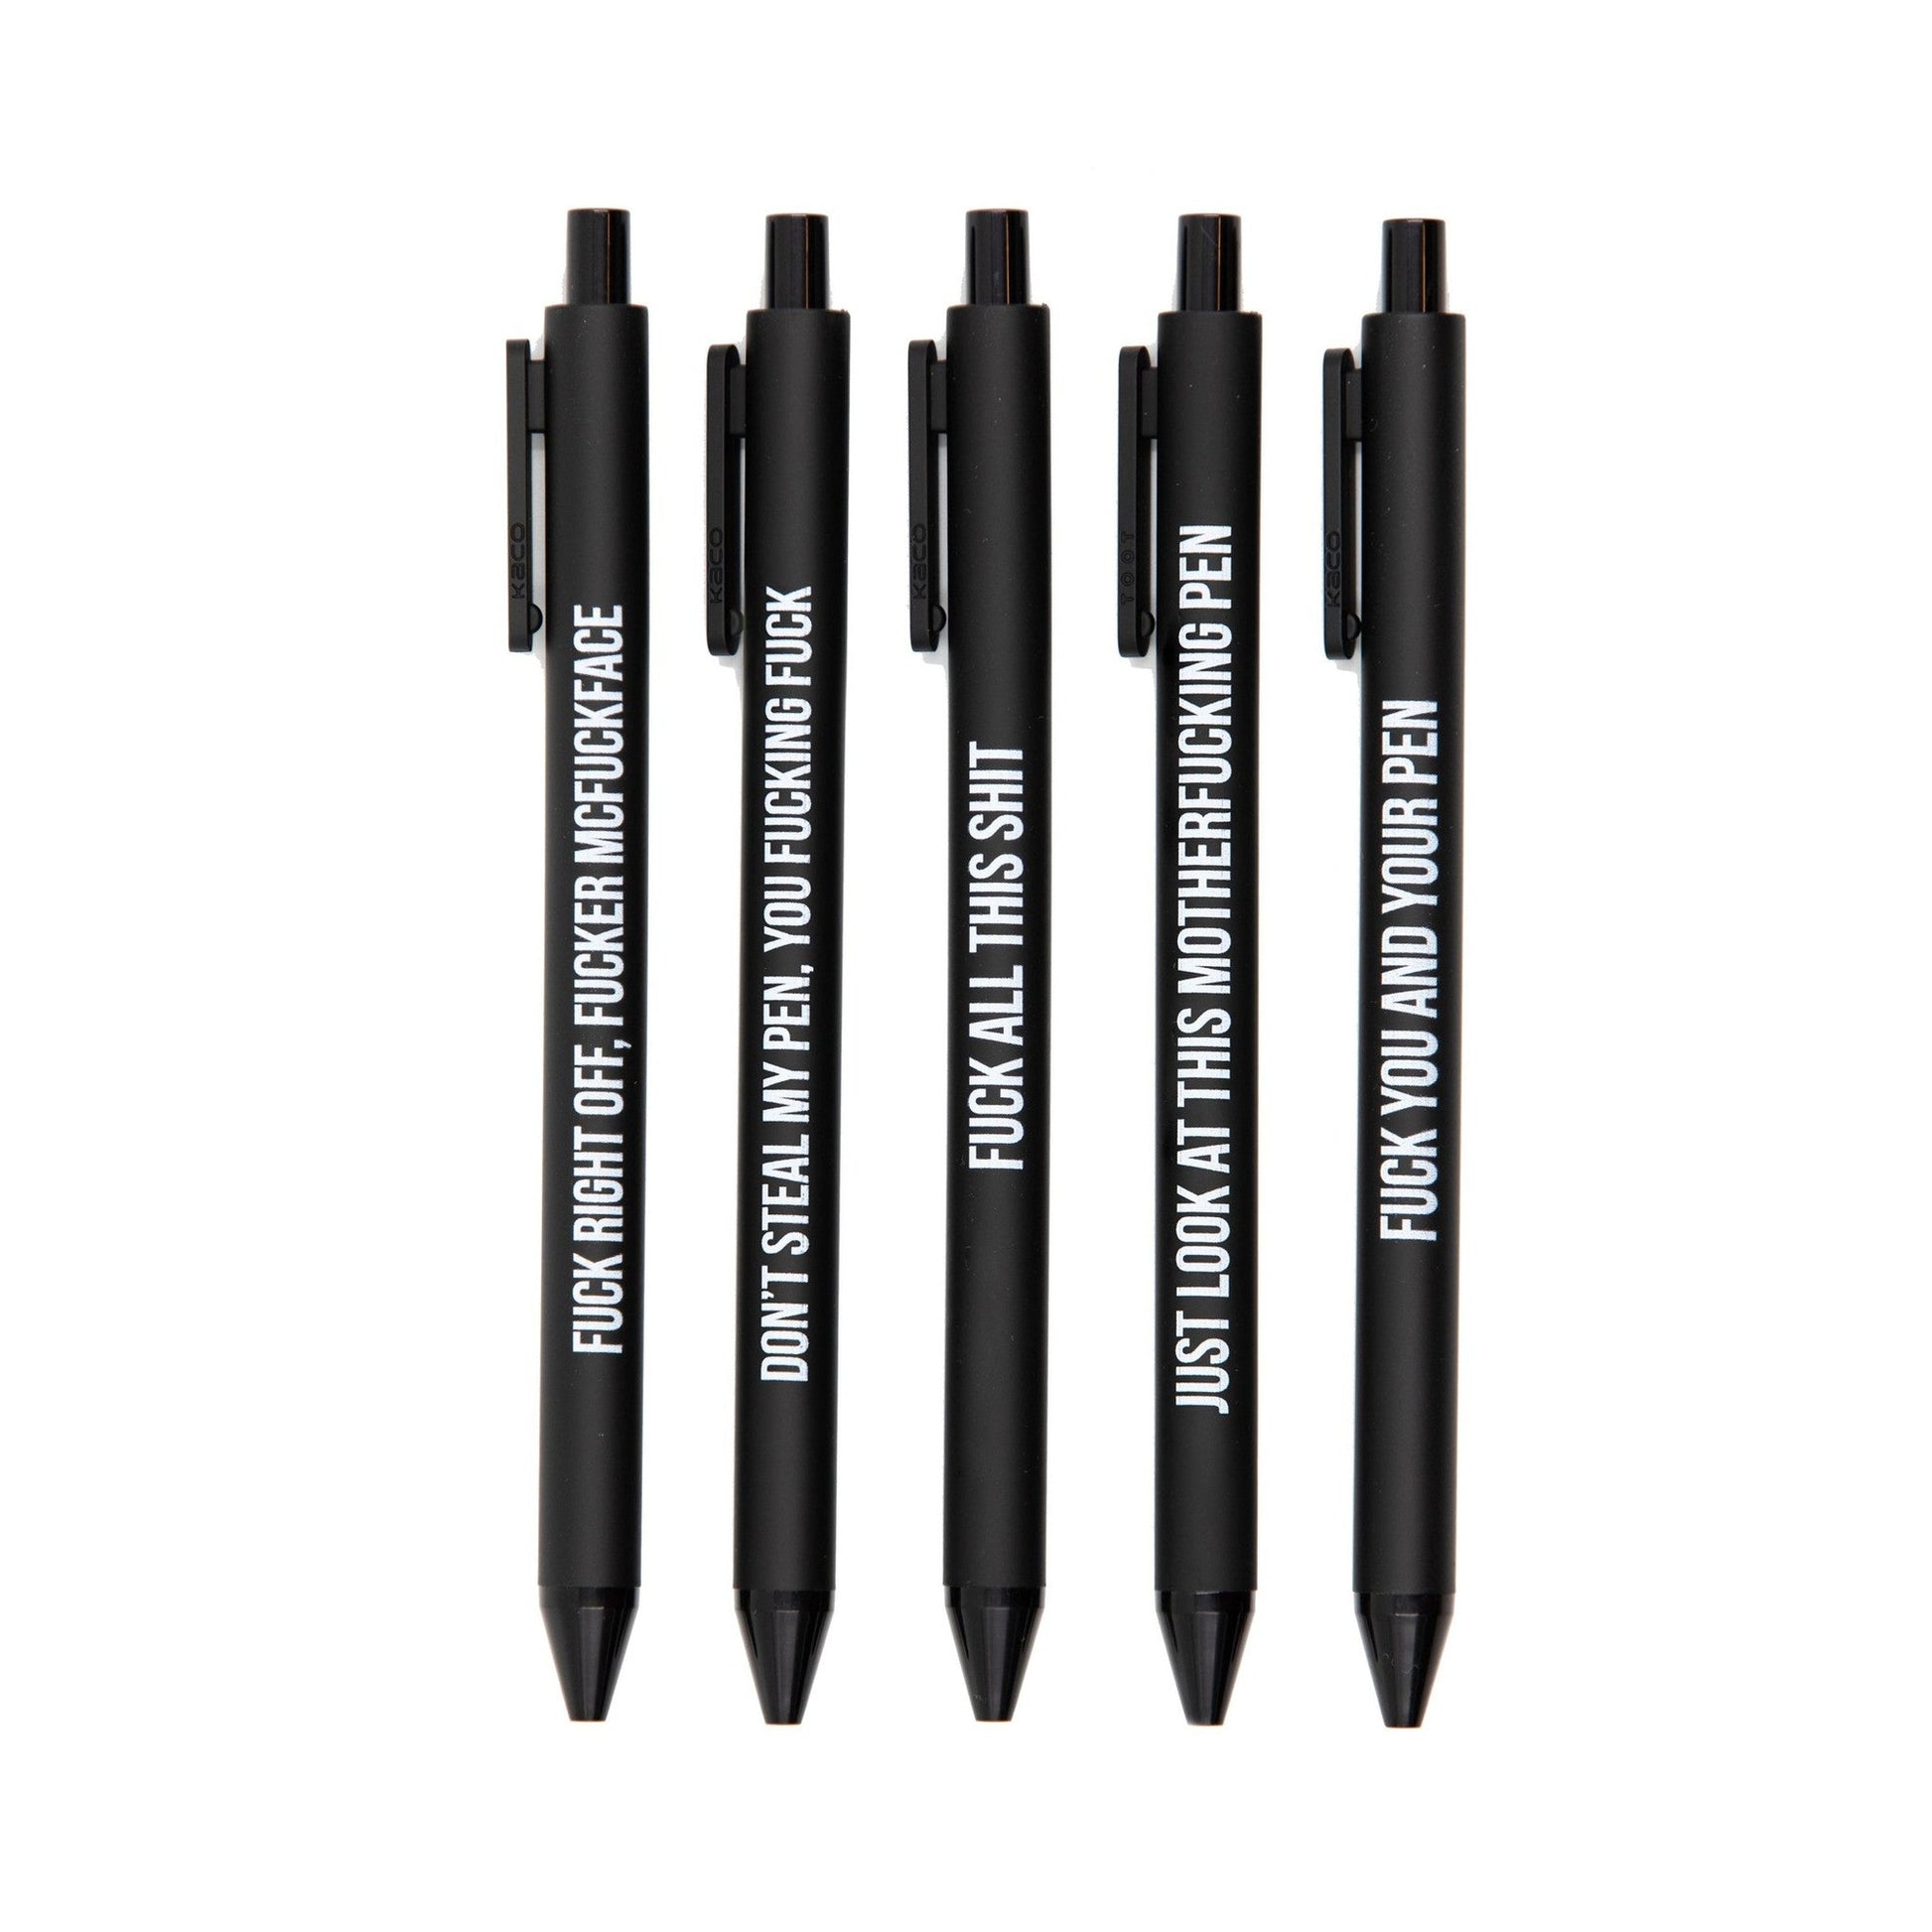 GetBullish Set Of 5 Sweary Fck Cussing Gel Pens, Black, Snarky Novelty  Office Supplies, Sassy Gifts For Friends, Co-Workers, Boss